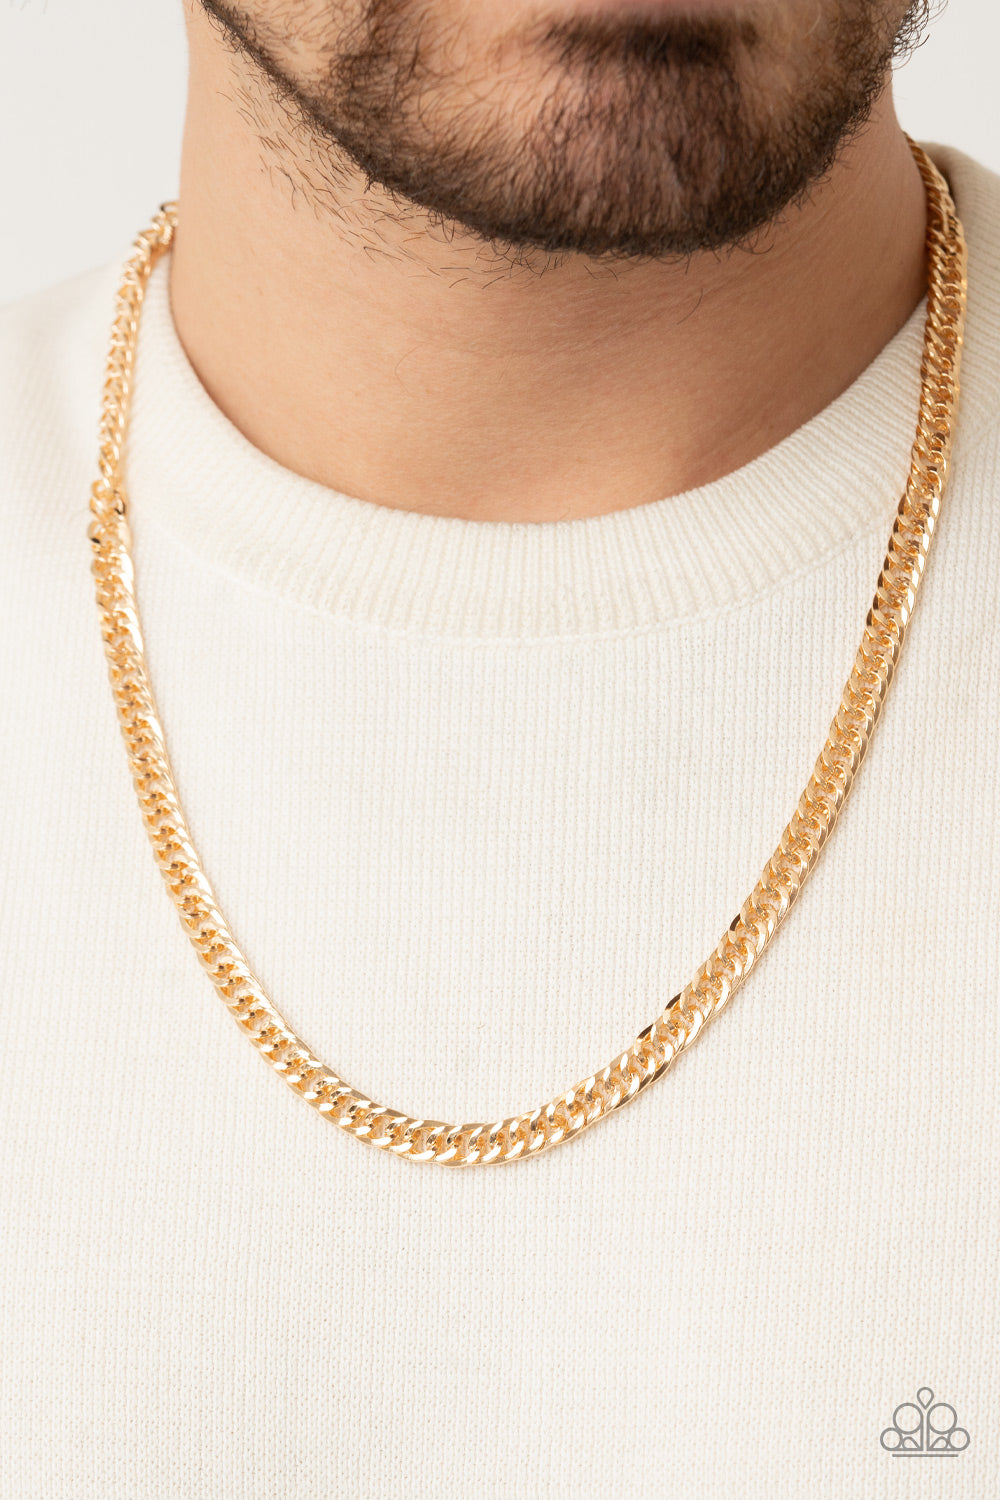 Paparazzi ♥ Valiant Victor - Gold ♥  Mens Necklace